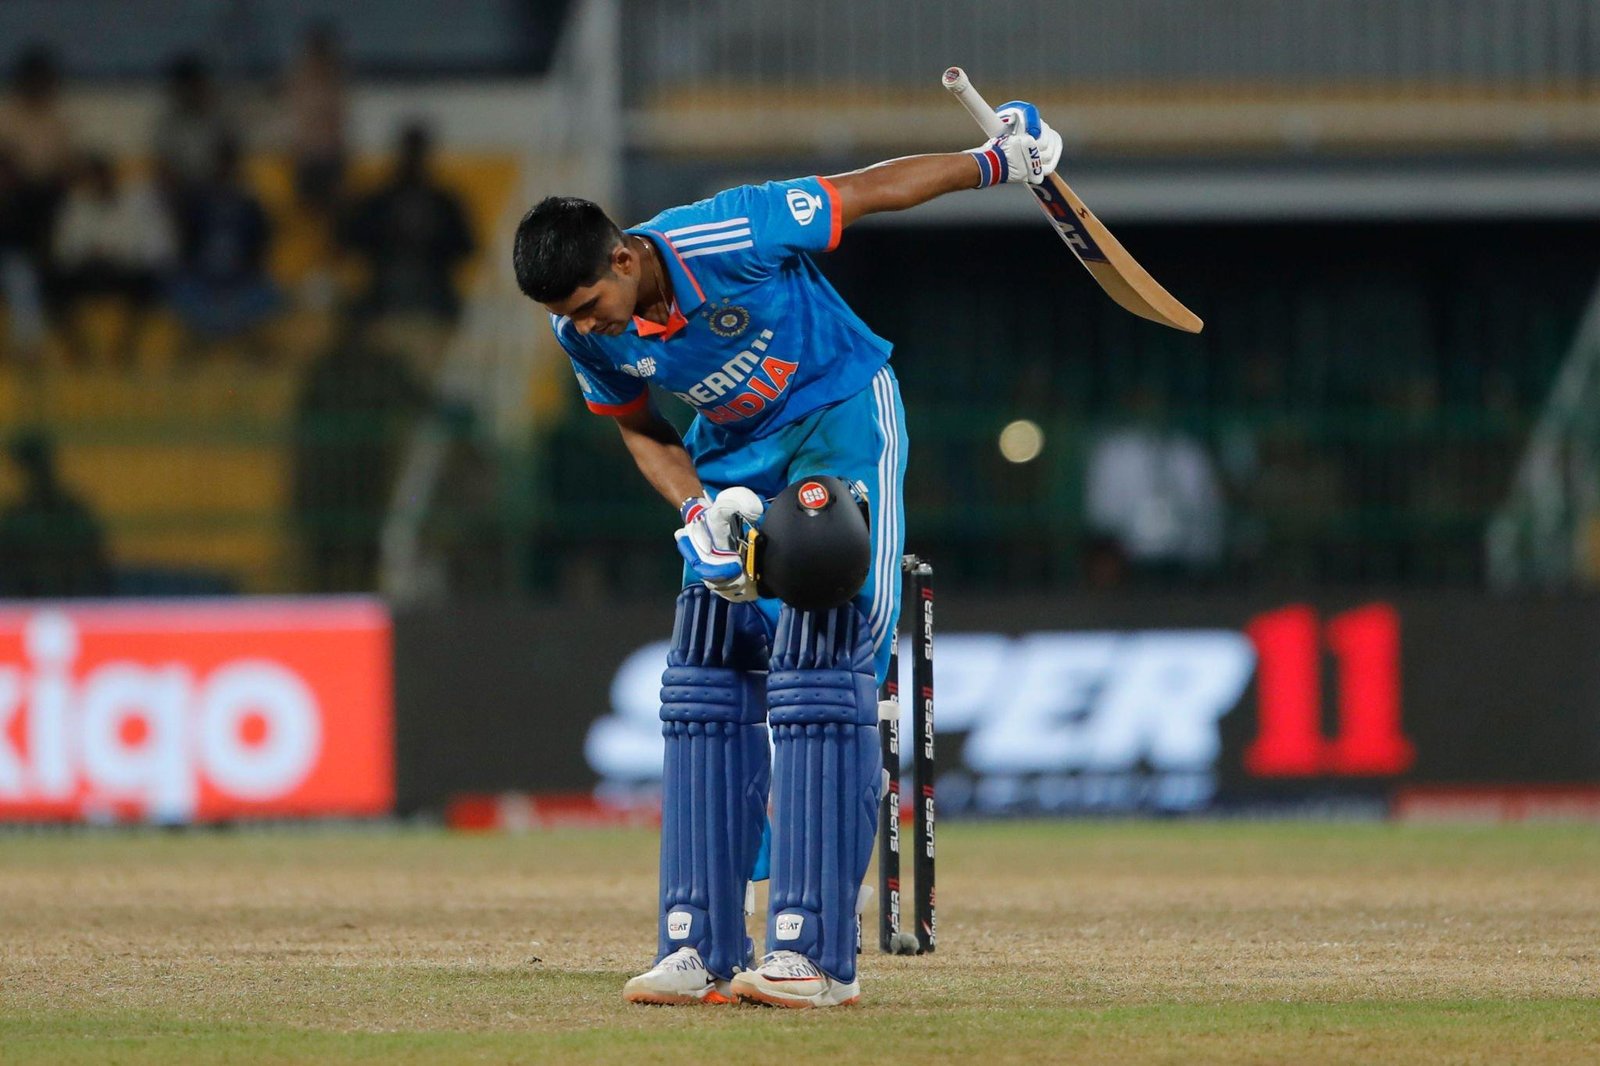 SHUBMAN GILL BECOMES THE NEW NO.1 RANKED ODI BATTER